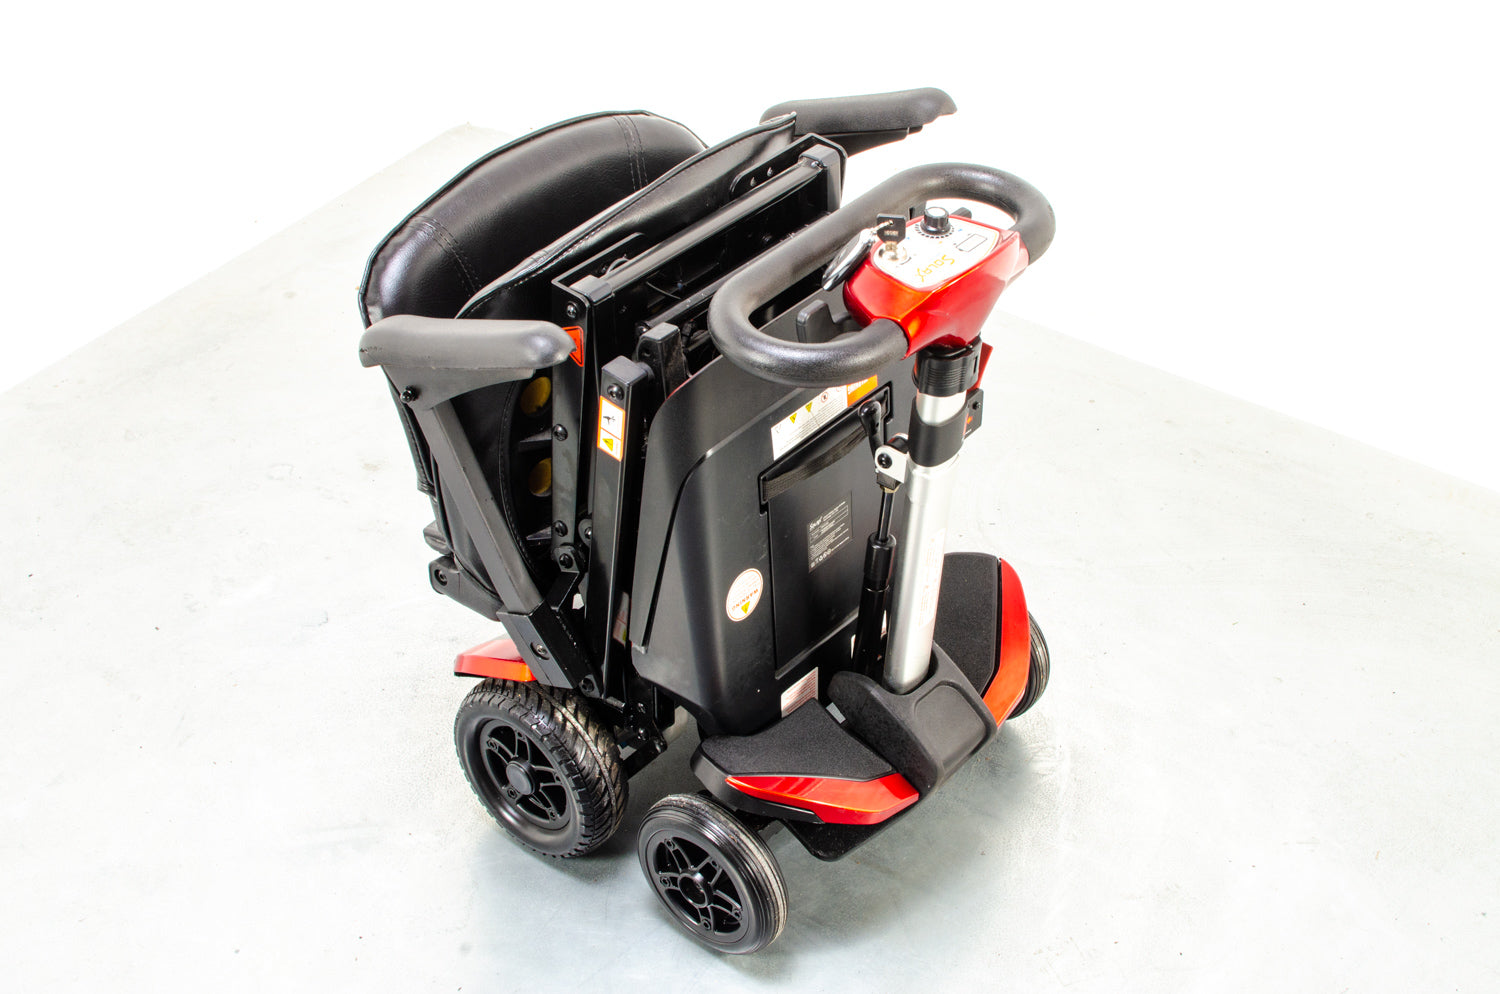 Monarch Smarti Remote Auto-Folding Used Mobility Scooter Lithium Travel Lightweight